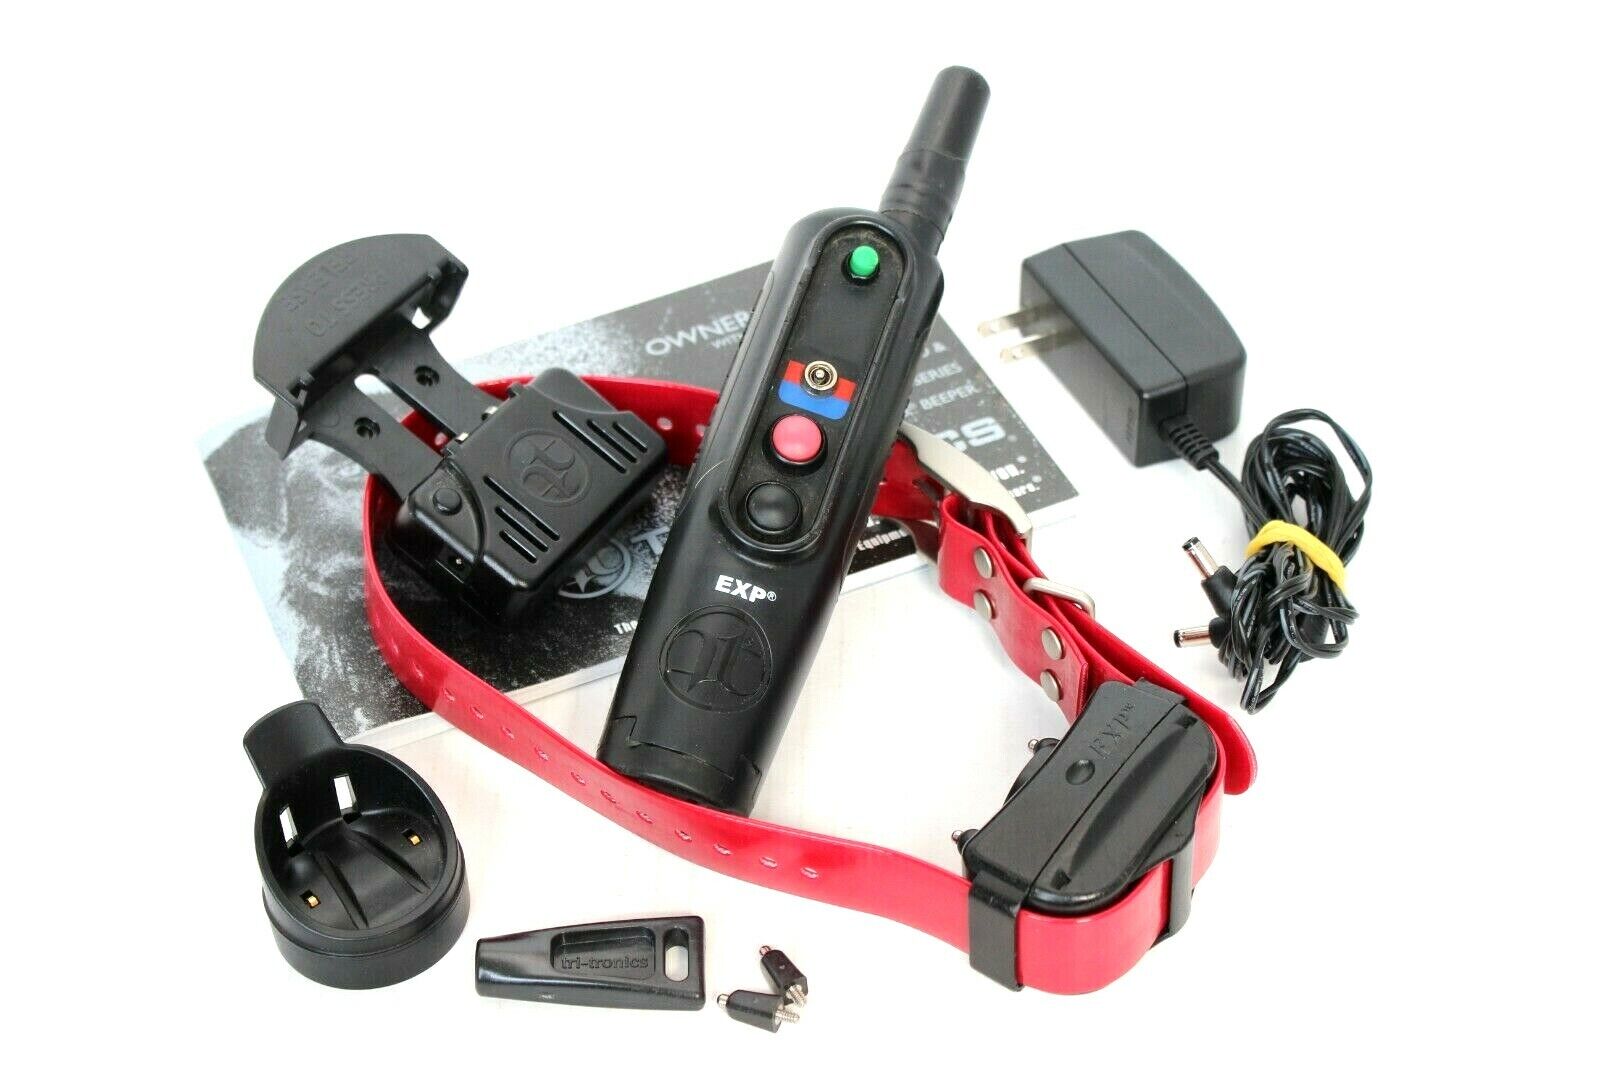 Inventory cleanup selling sale Tri-Tronics Field 90 G3 EXP Dog Great interest System w Training Chargers and